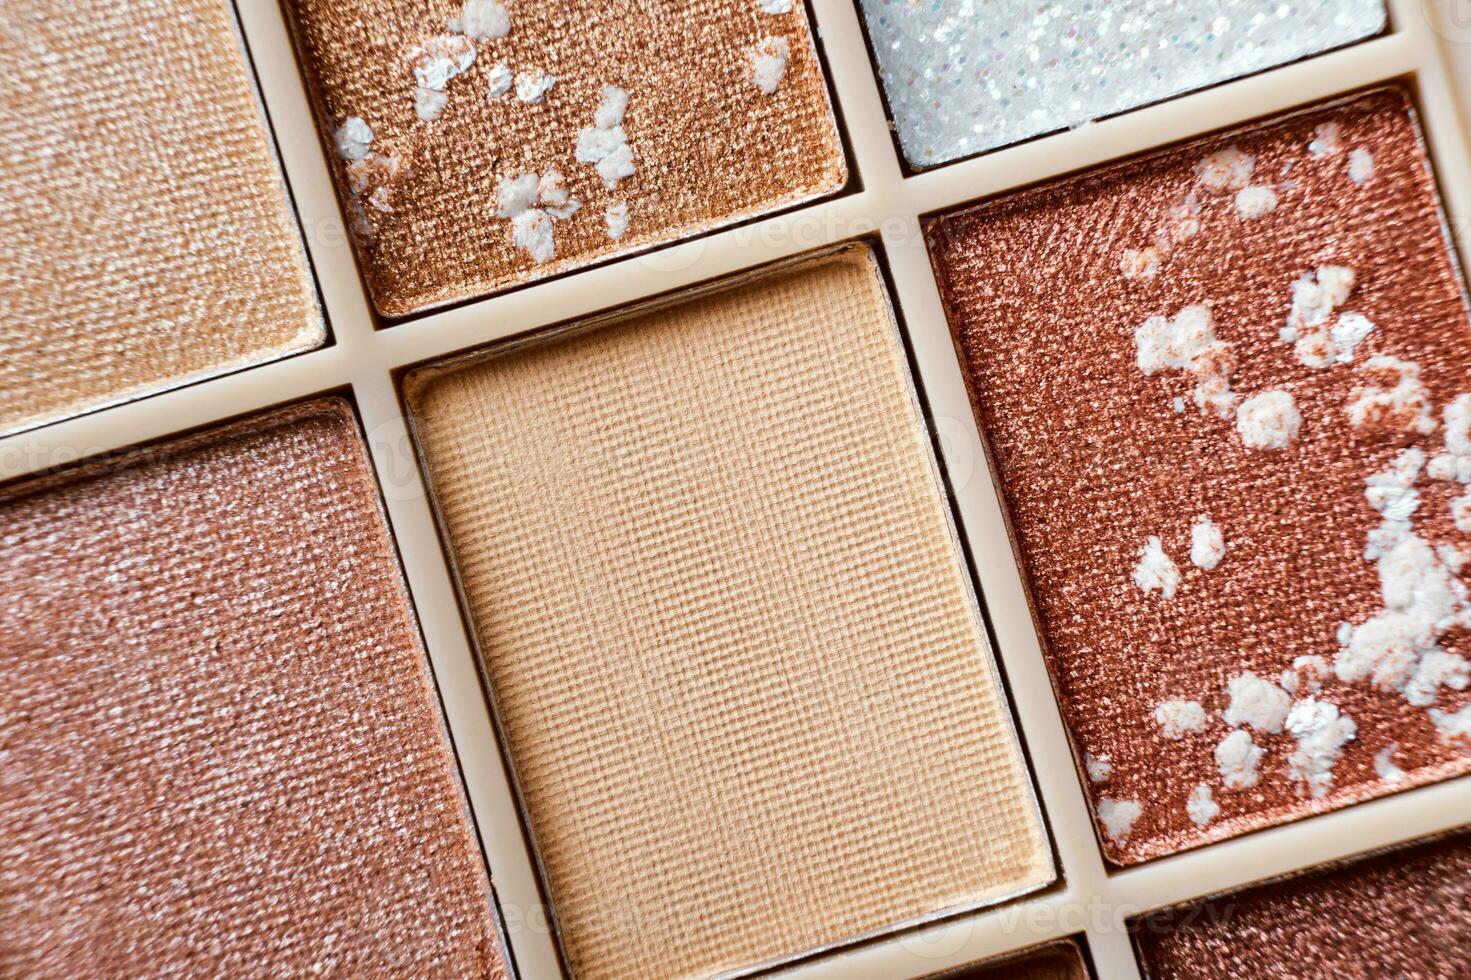 Eyeshadow colorful shades palette in beige tones close-up. Beauty abstract background photo